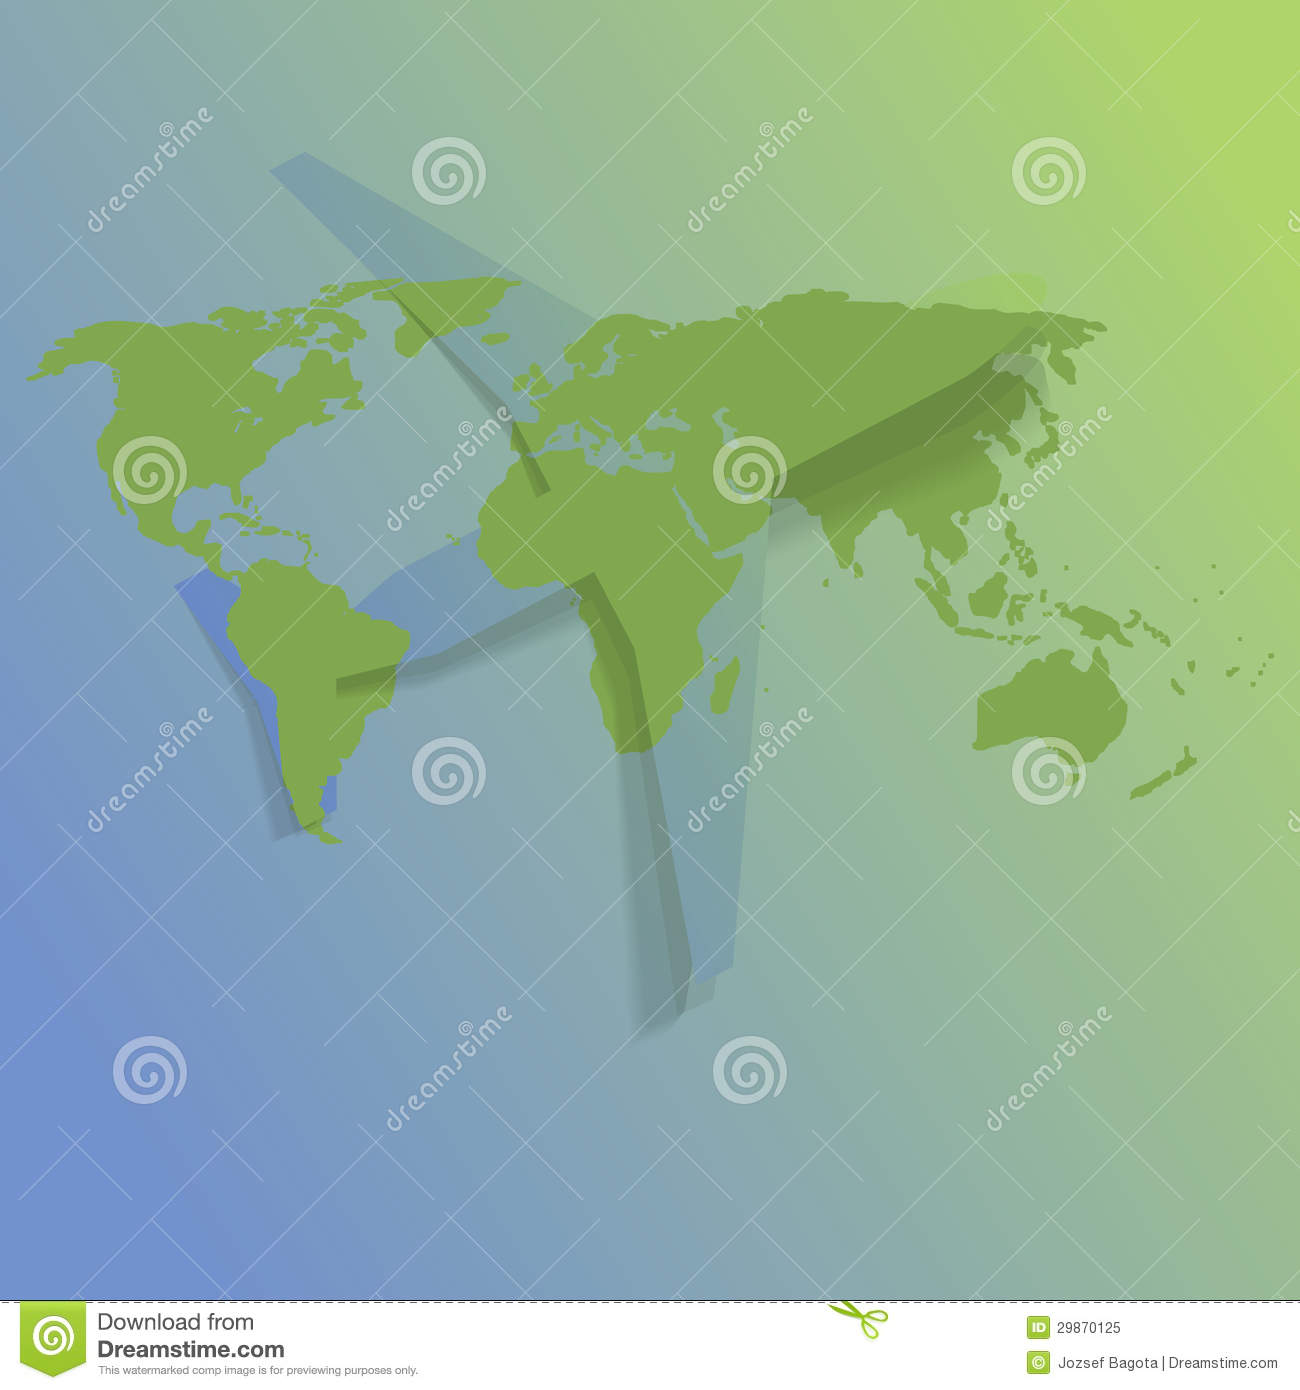 Pin World Map Transparent Background Image Search Results On Pinterest